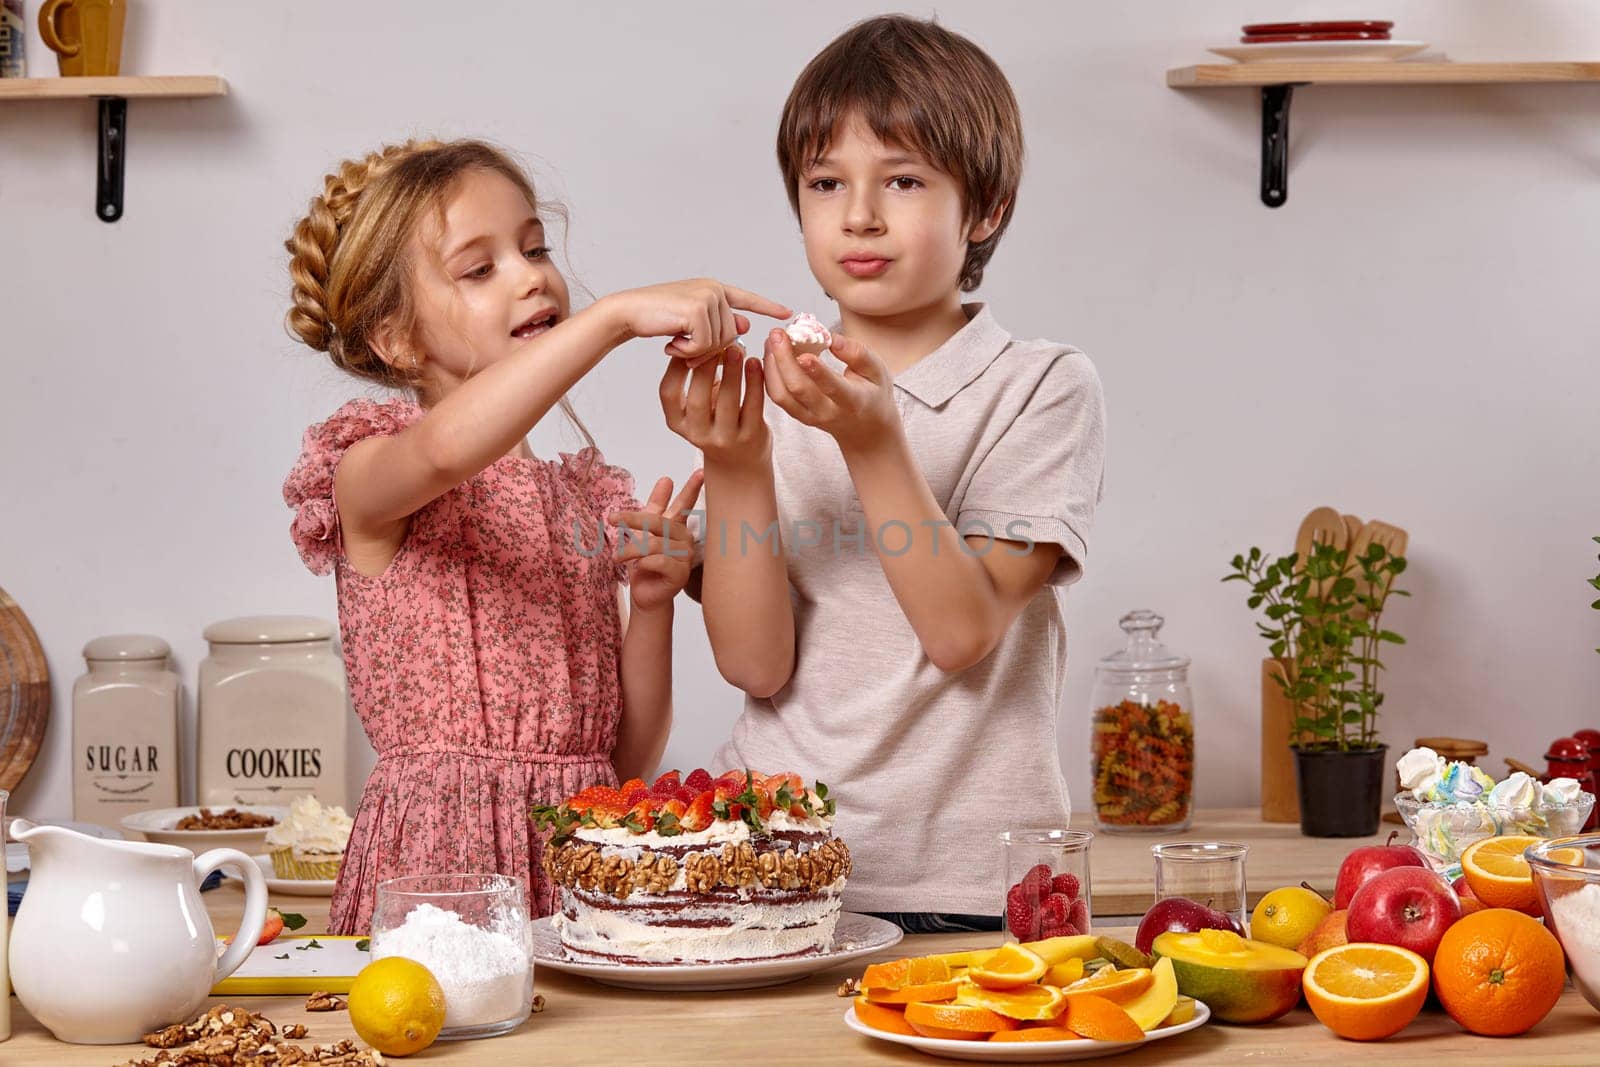 Little boy dressed in a light t-shirt and jeans and a wonderful girl with a braid in her hair, wearing in a pink dress are making a cake at a kitchen, against a white wall with shelves on it. Boy is holding a marshmallow in his hand and girl is looking at it.